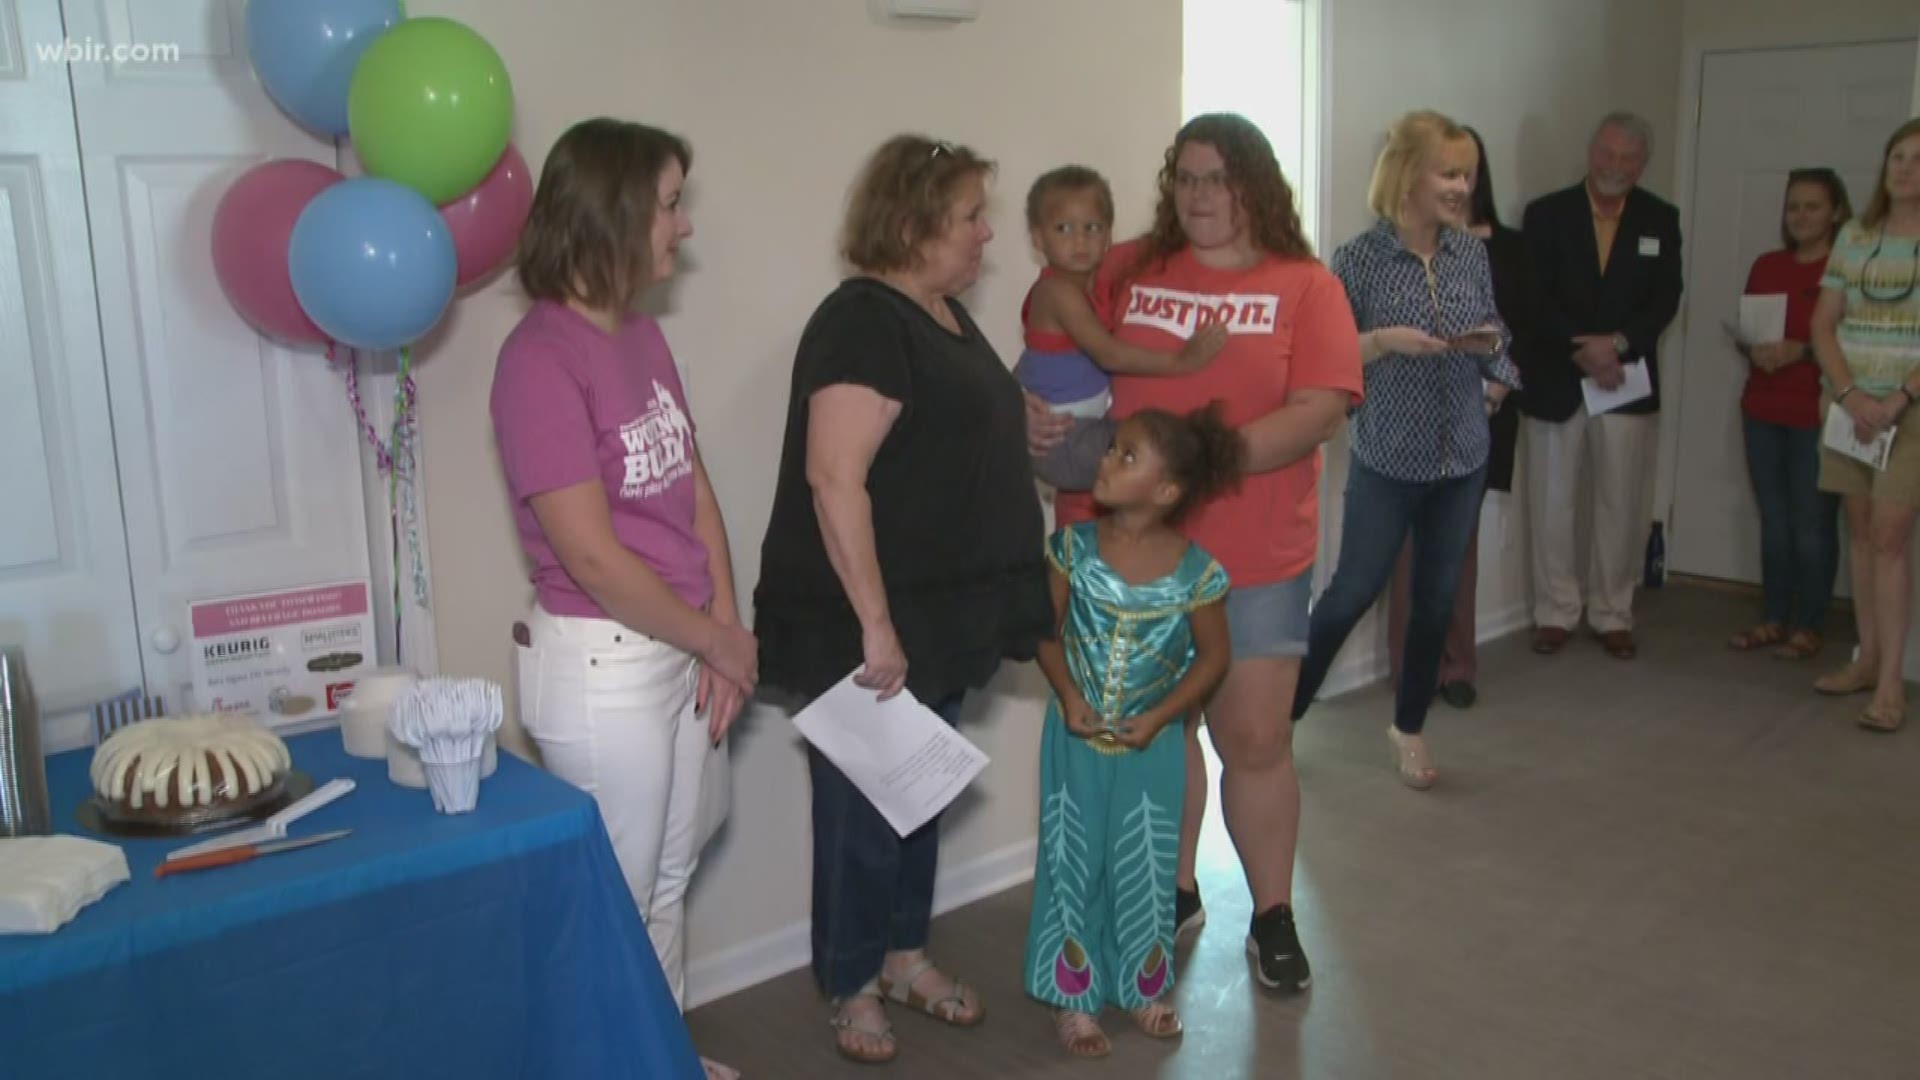 A family received the keys to their new home built in part by a female Habitat for Humanity crew earlier this summer.